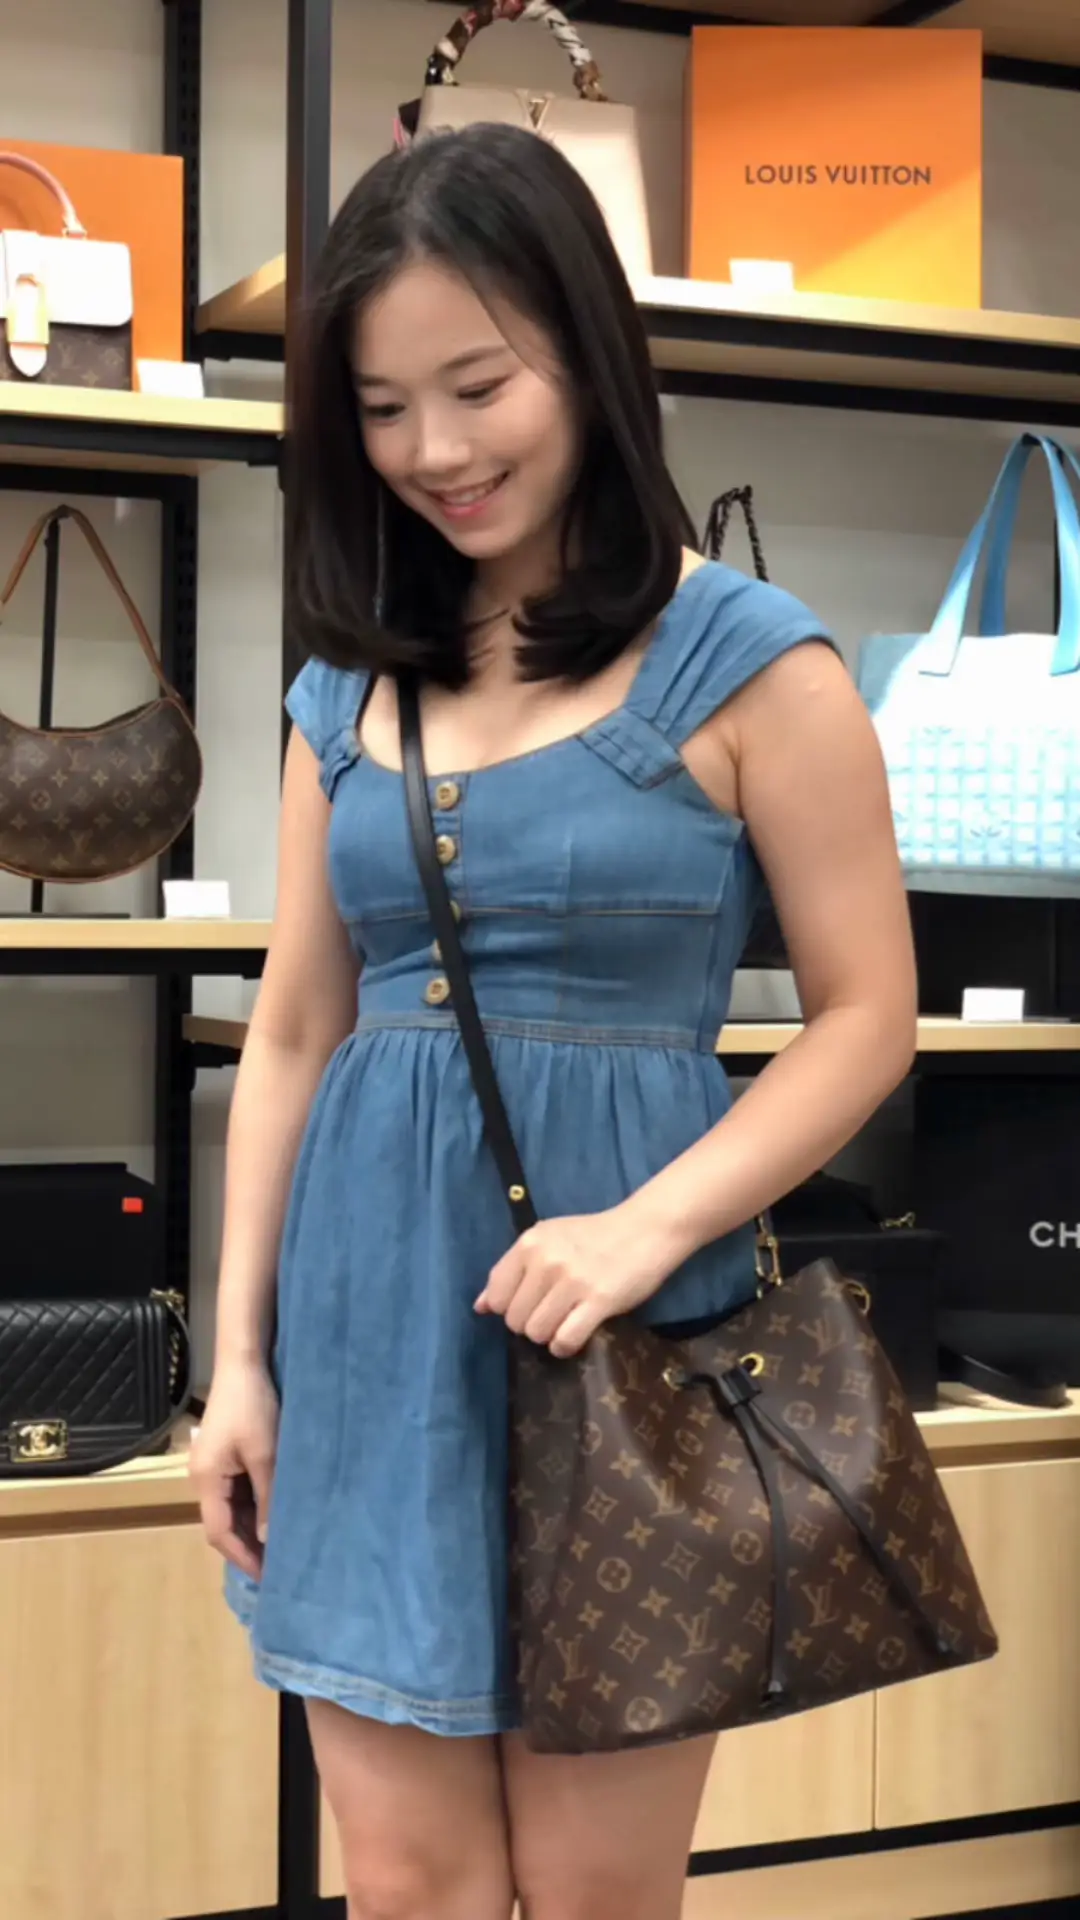 louis vuitton neverfull mm outfit